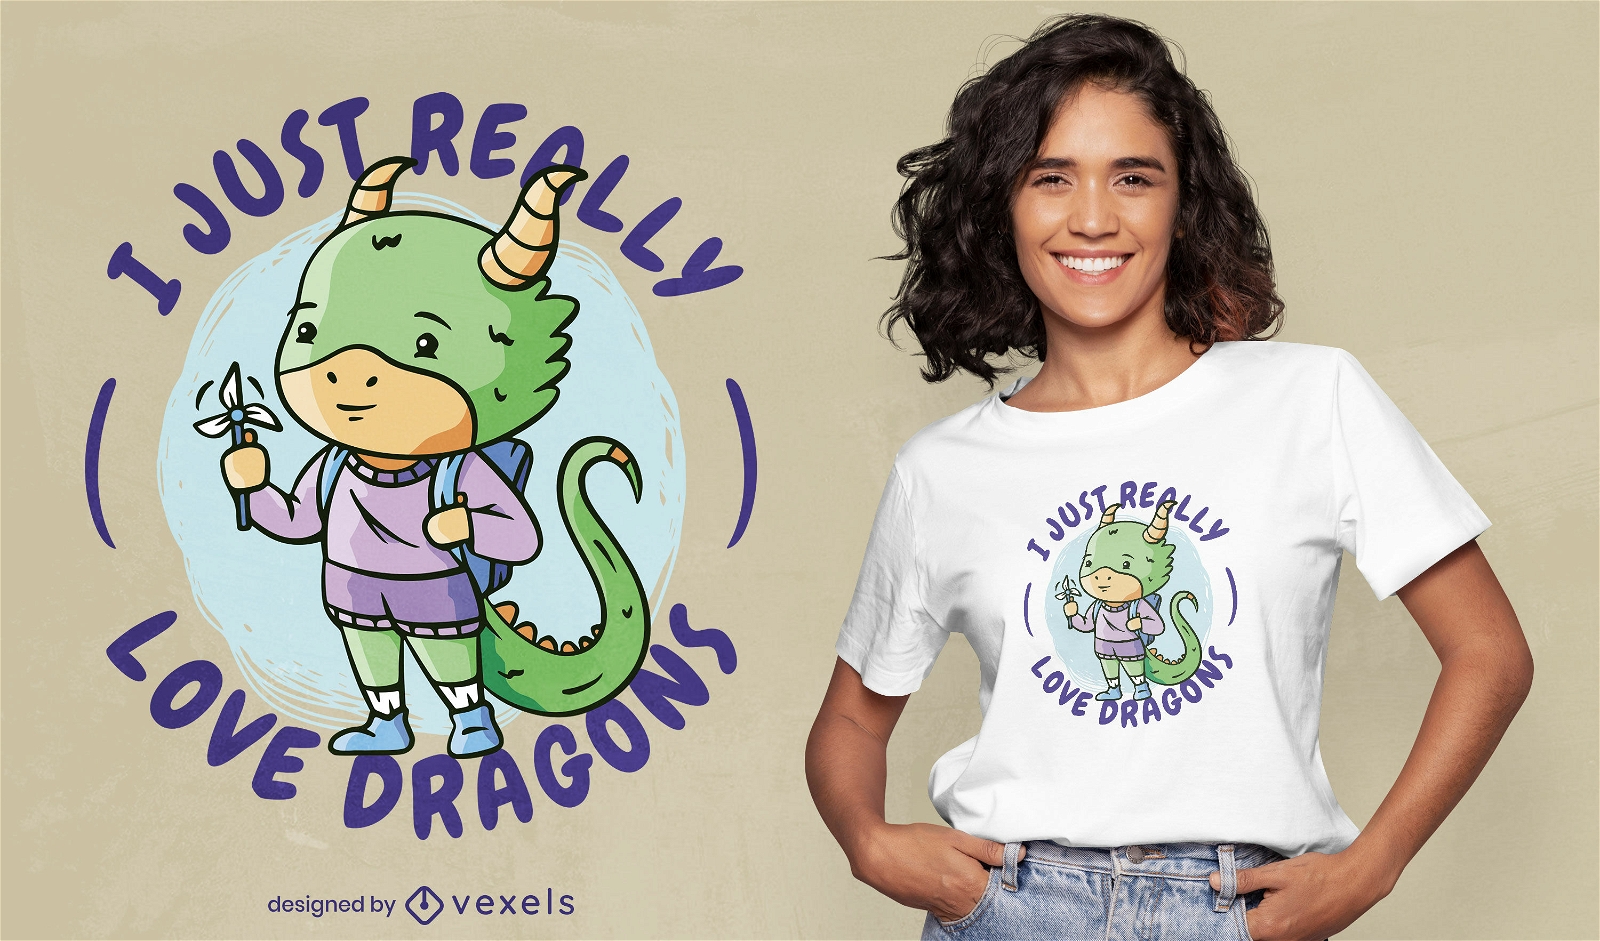 Lovely dragons quote t-shirt desing